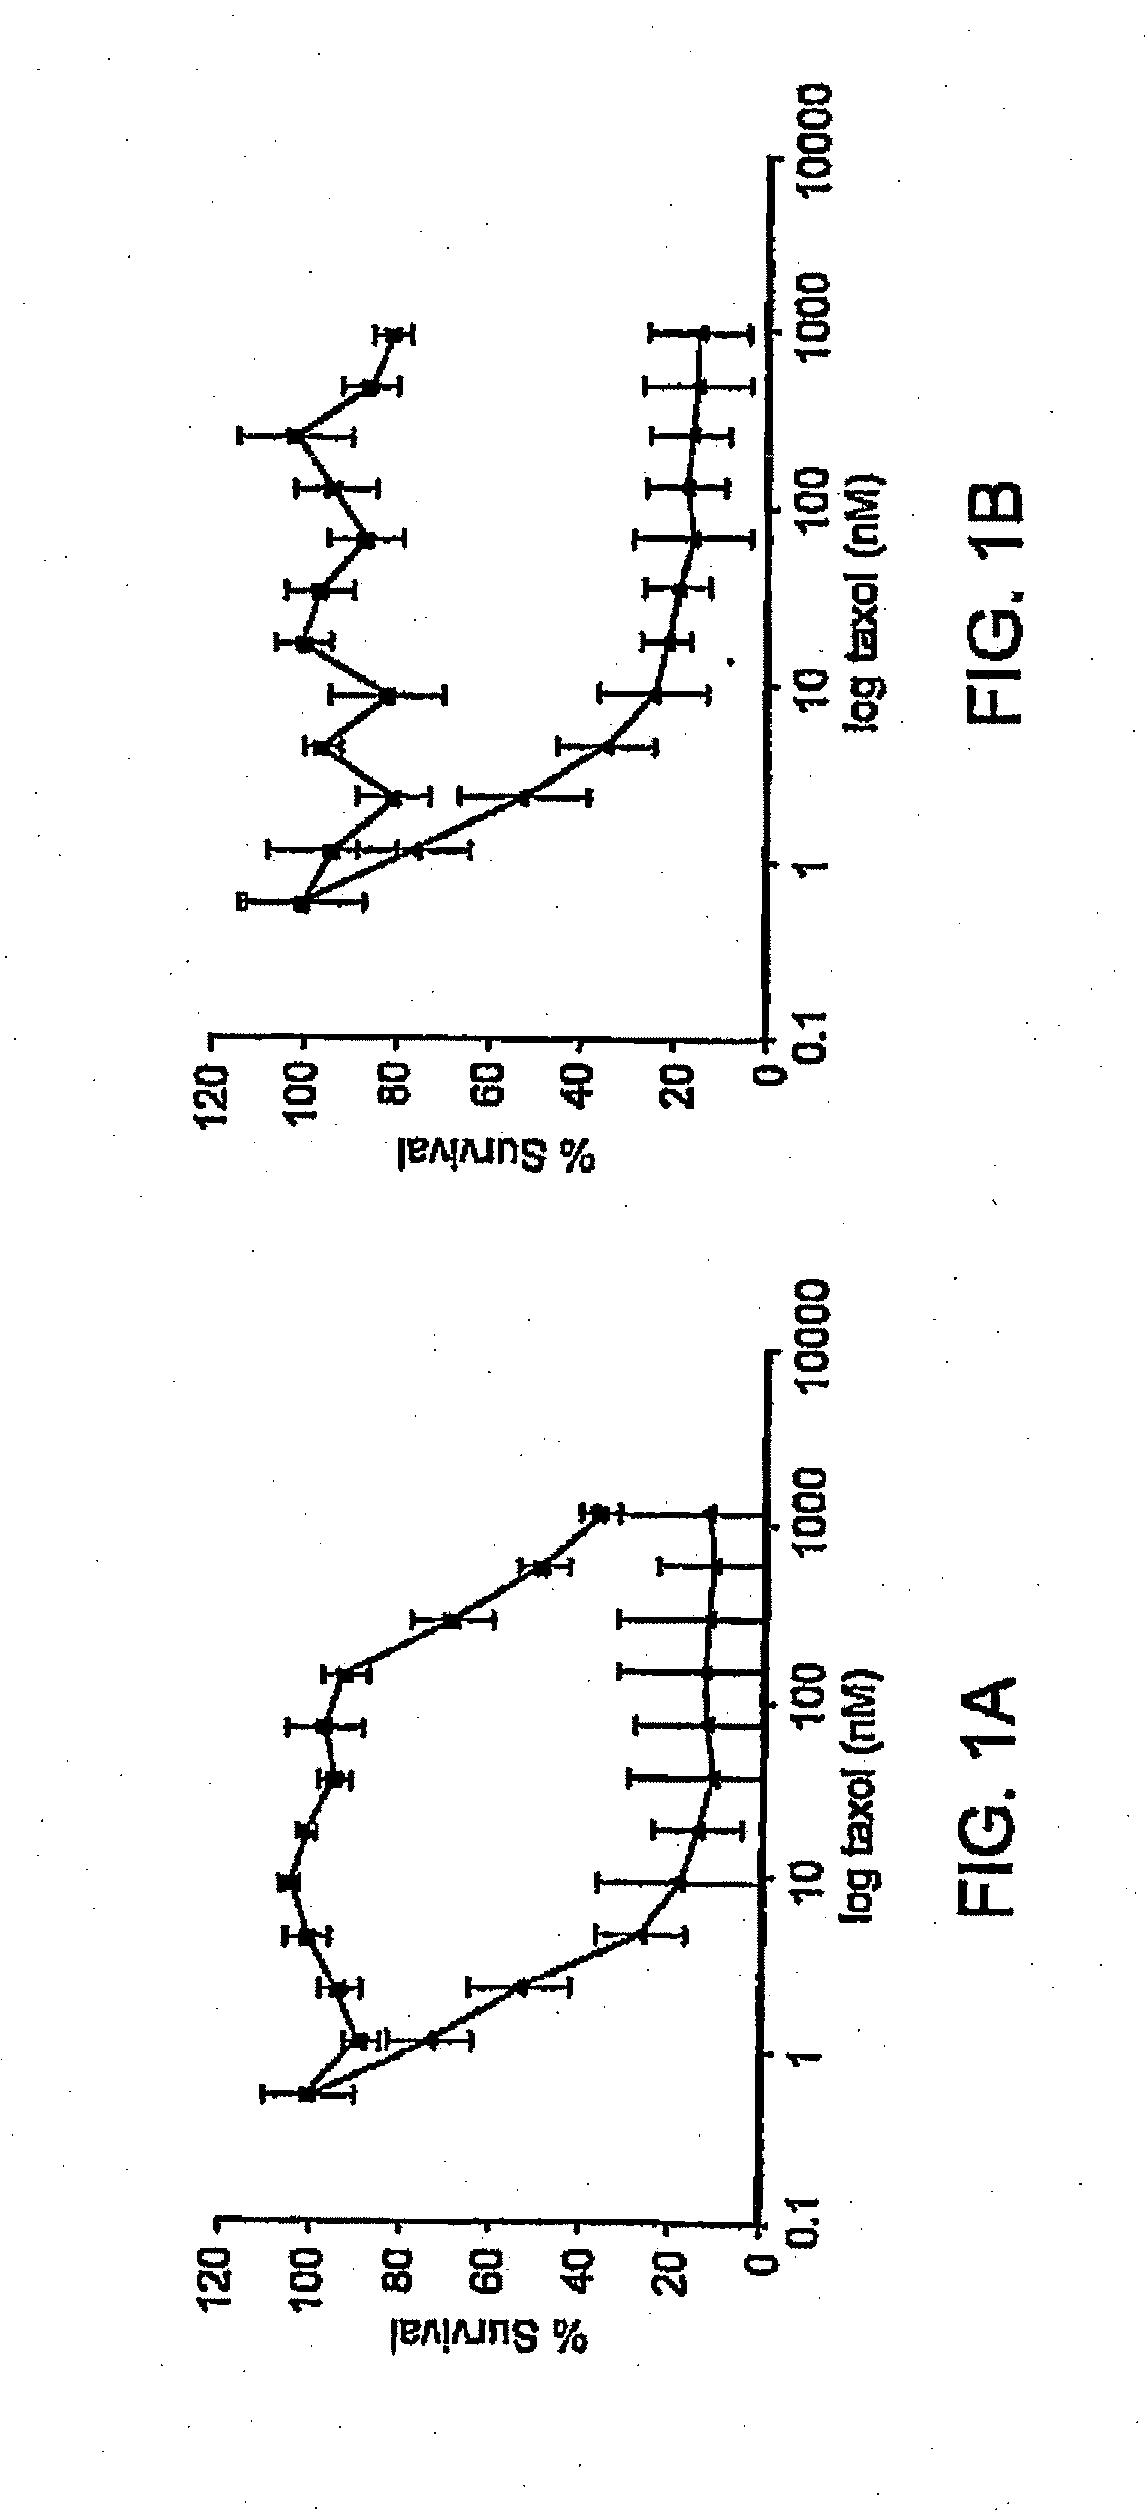 Methods to predict and prevent resistance to taxoid compounds